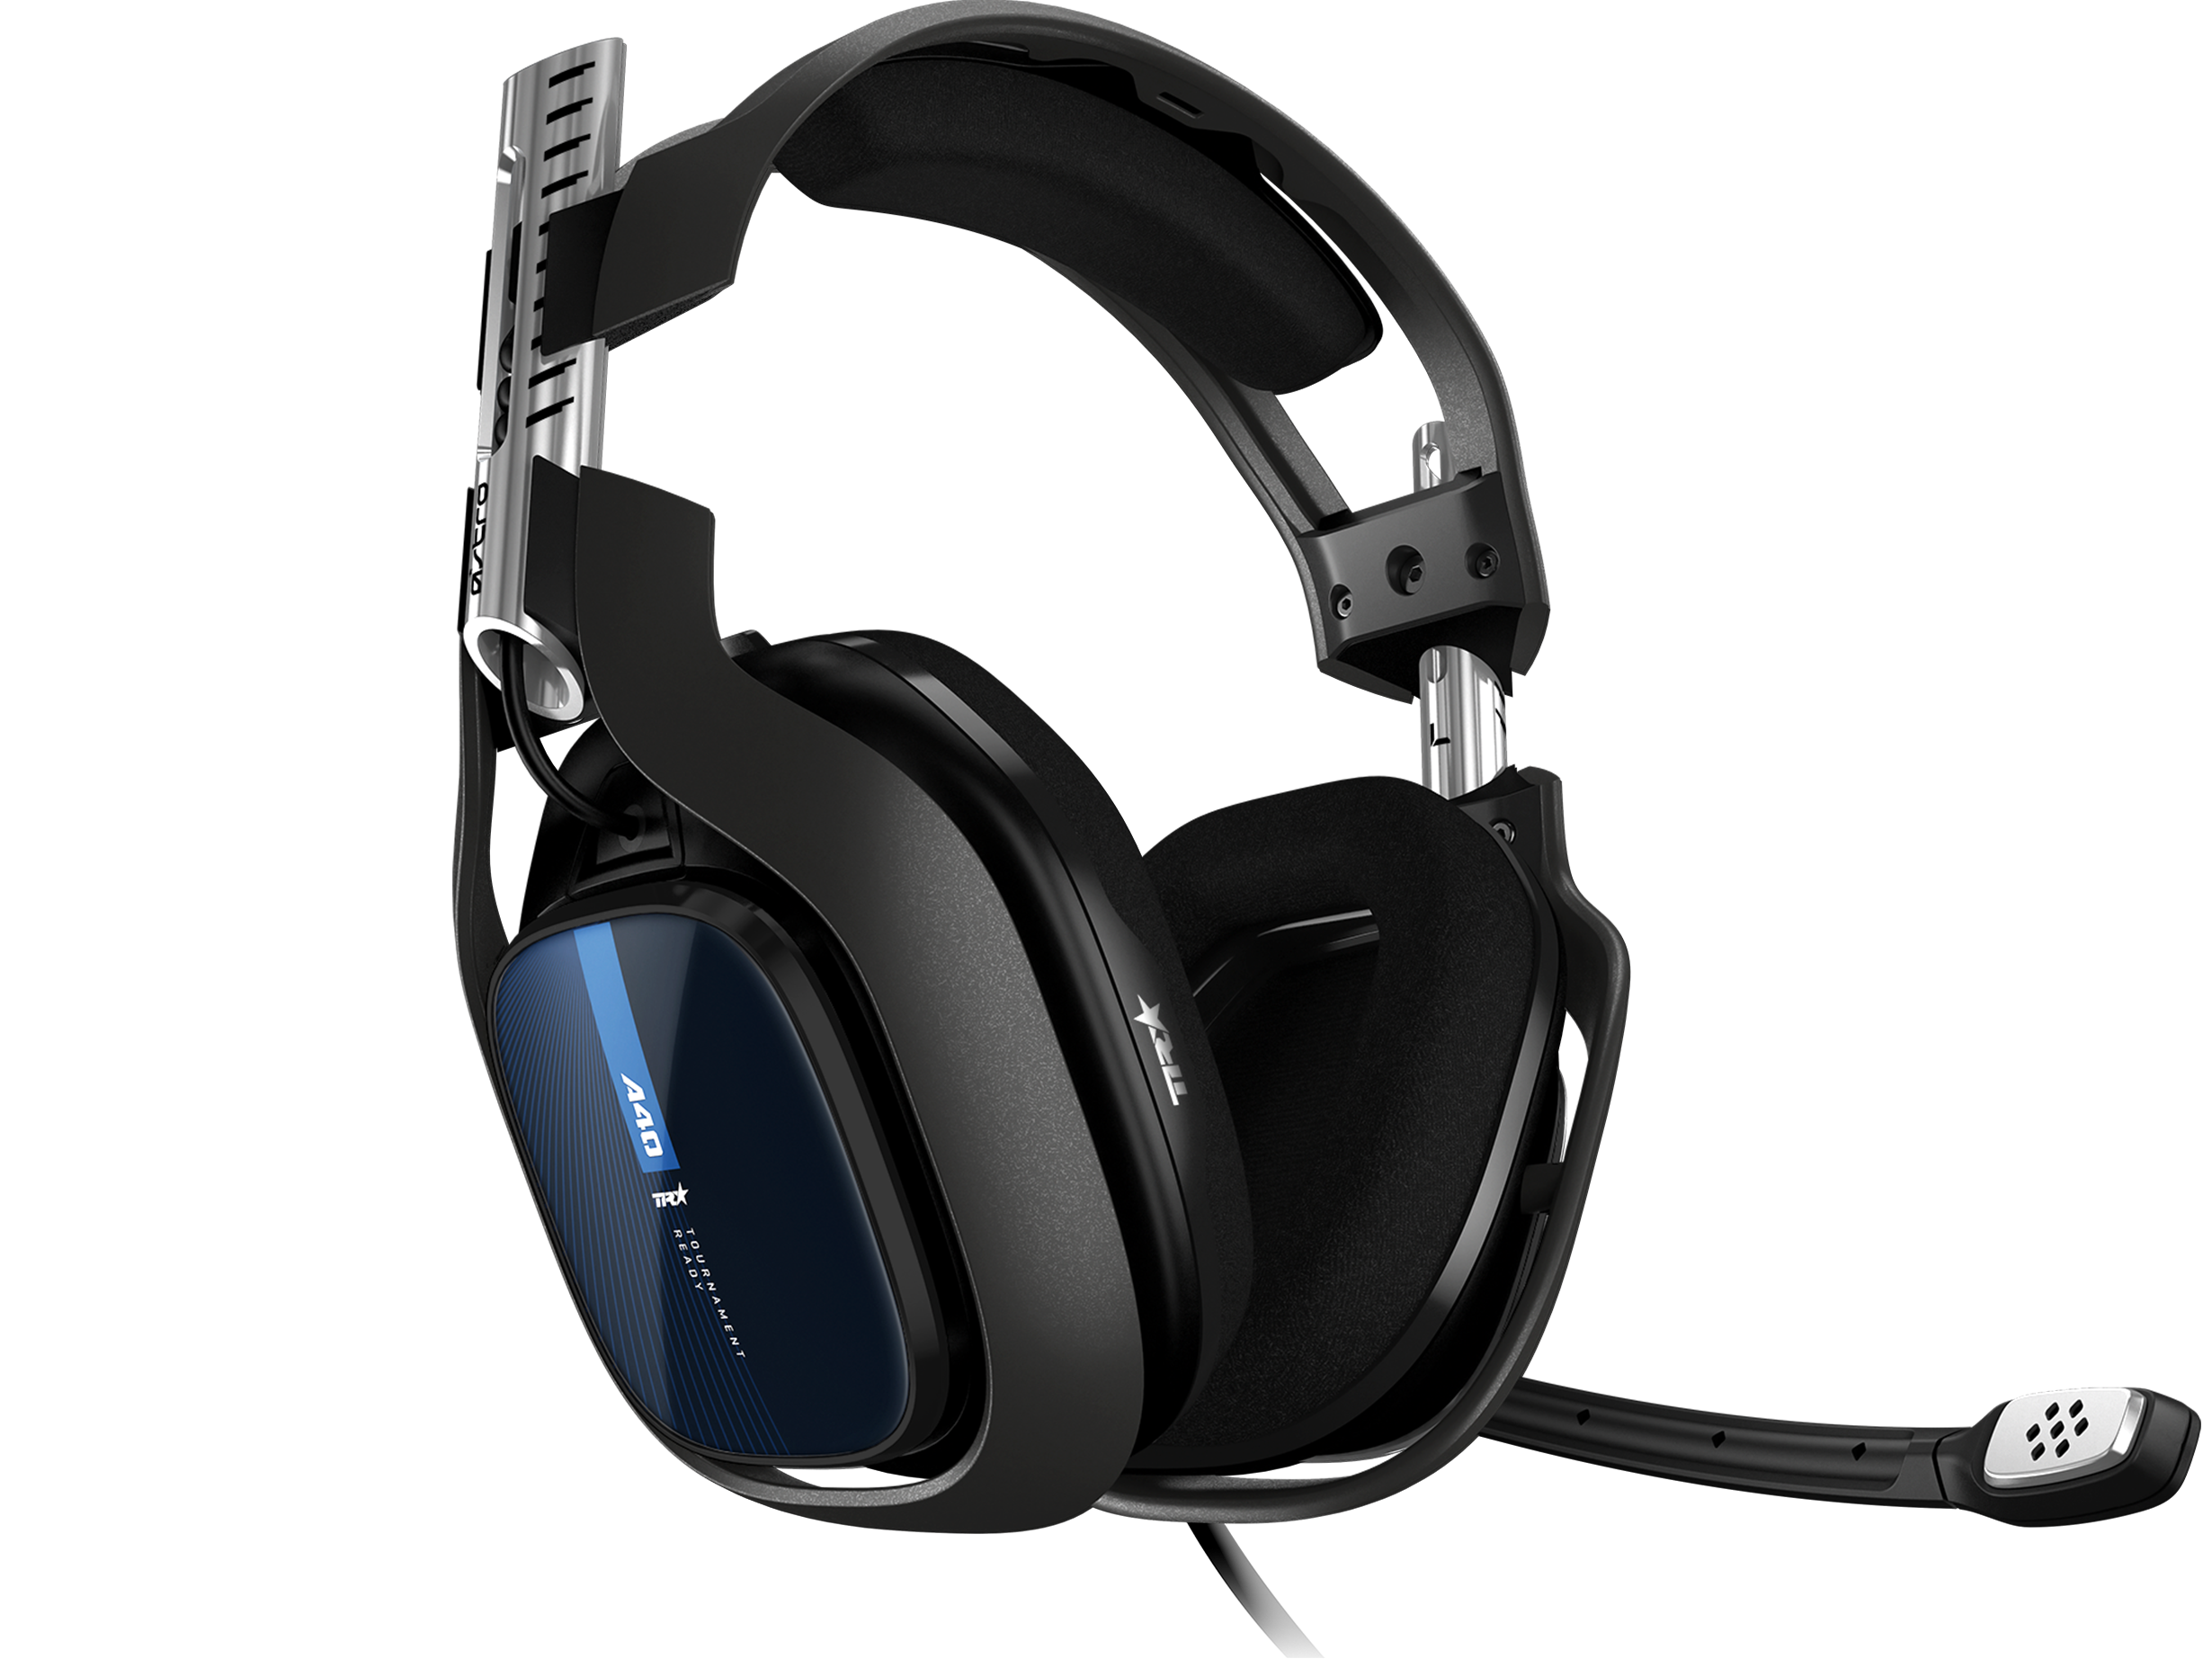 ASTRO A40 TR Headset | ASTRO Gaming